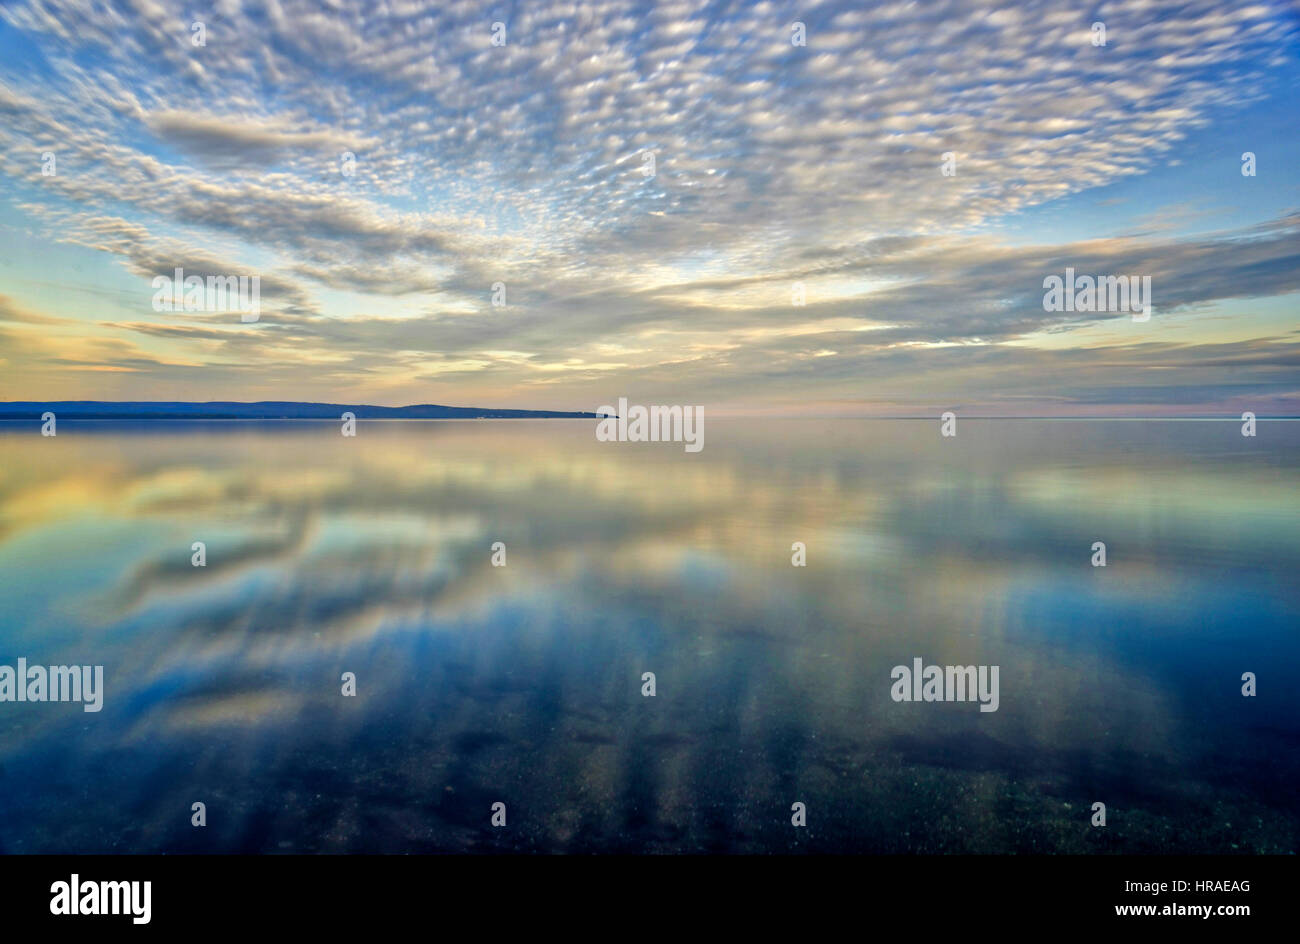 Gorgeous altocumulus clouds reflected in a nearly flat sea in Baie des Chaleurs, Gaspesie, Quebec Stock Photo